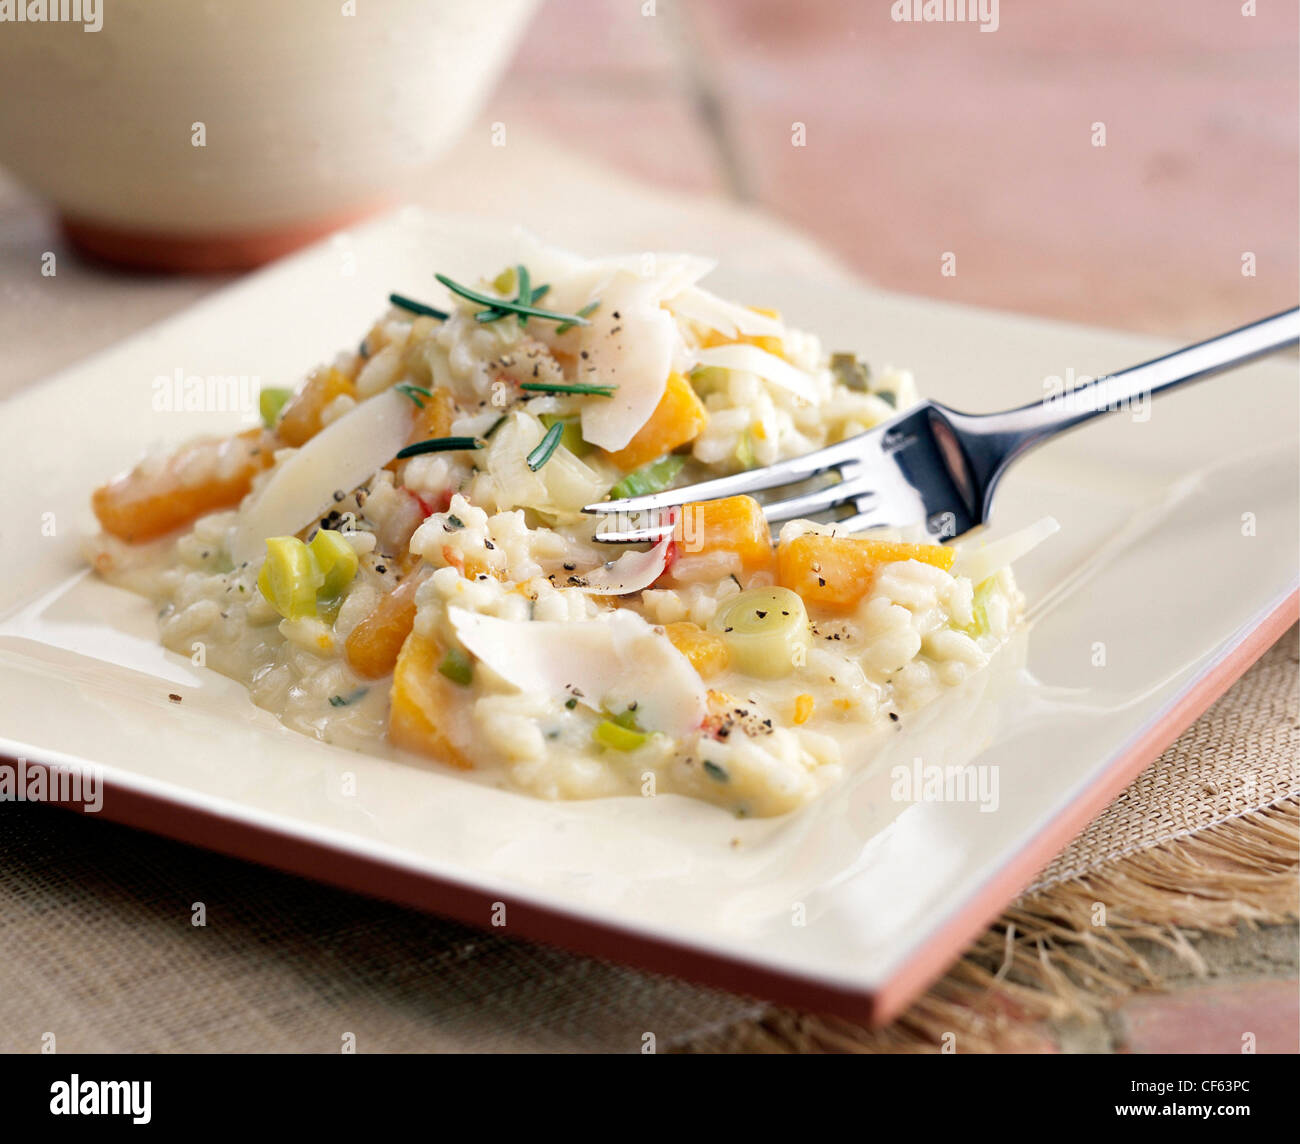 Butternut Squash and Gruyere Risotto You can use any type of squash pumpkin to make this delicious creamy risotto The secret Stock Photo